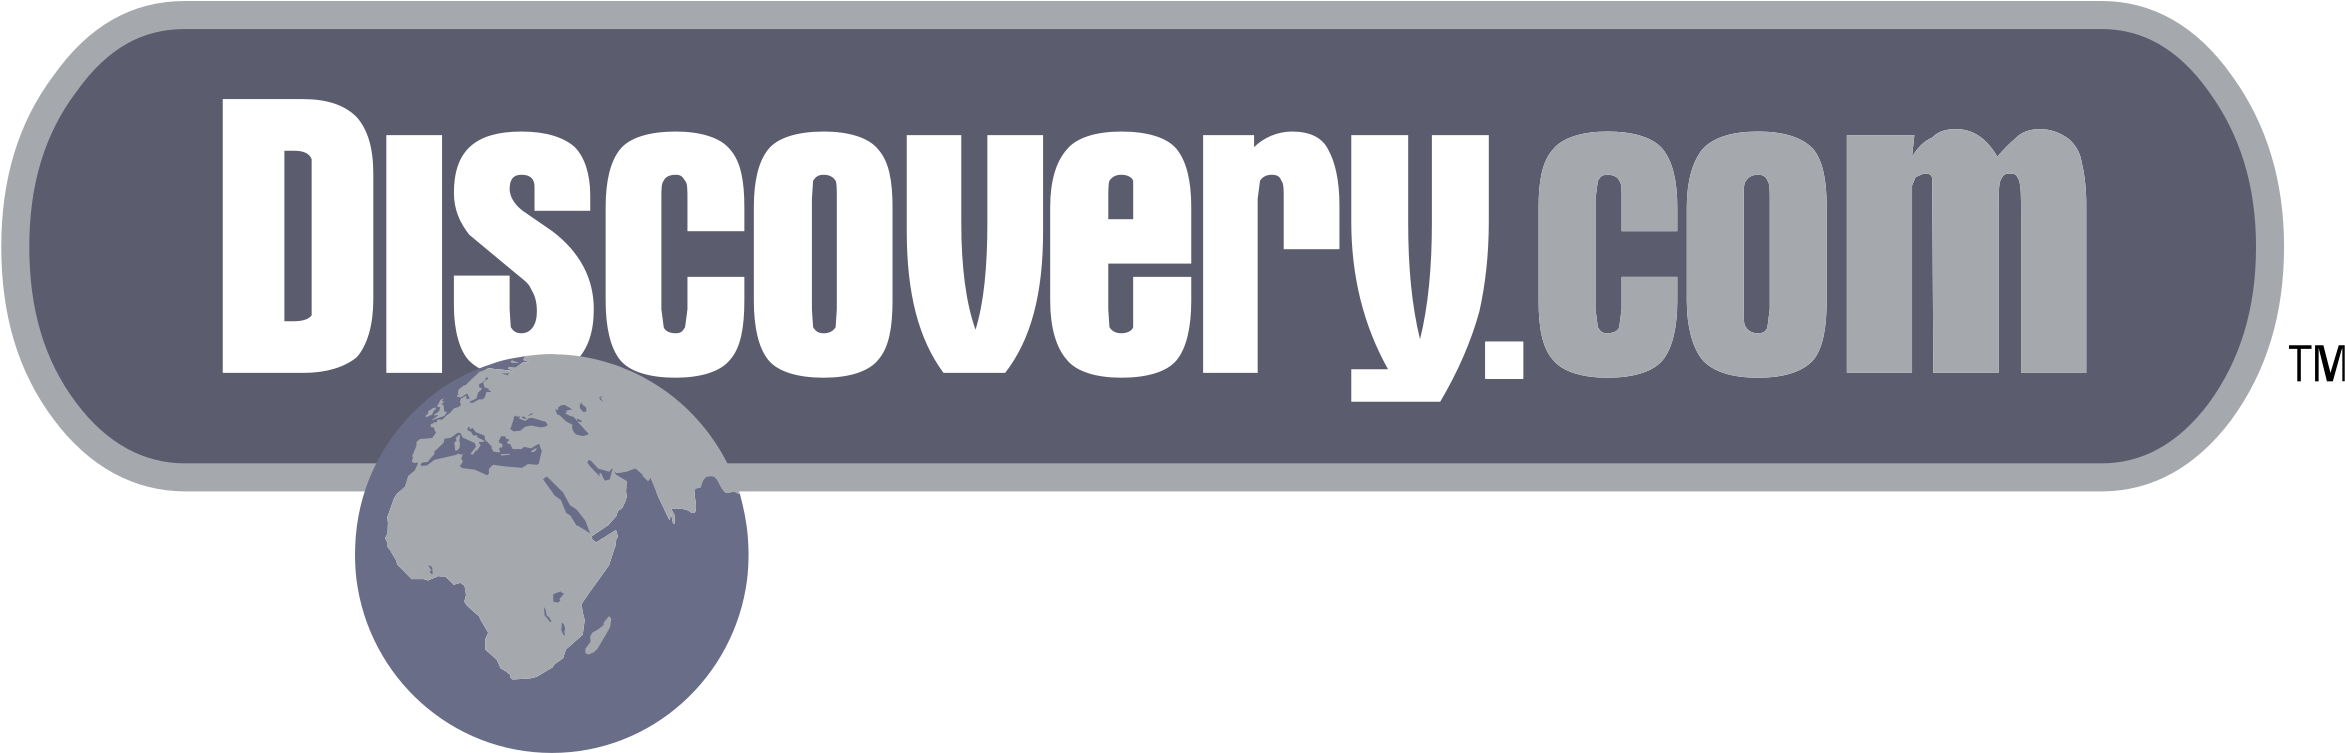 Discovery Channel Logo Png